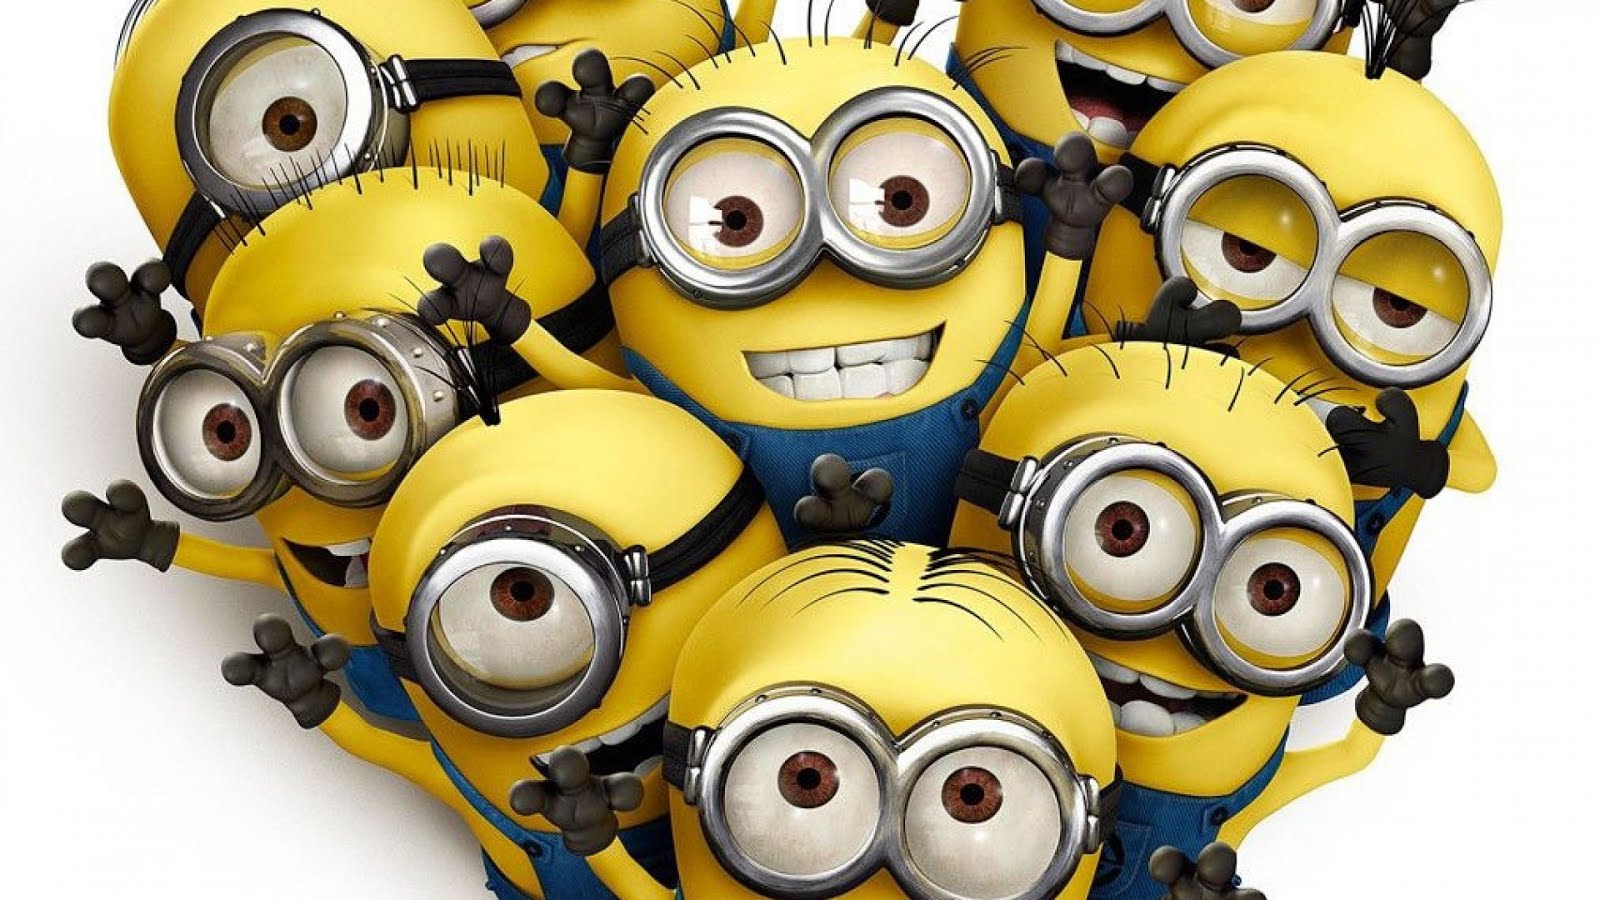 Did we mention that Room 20 loves minions?